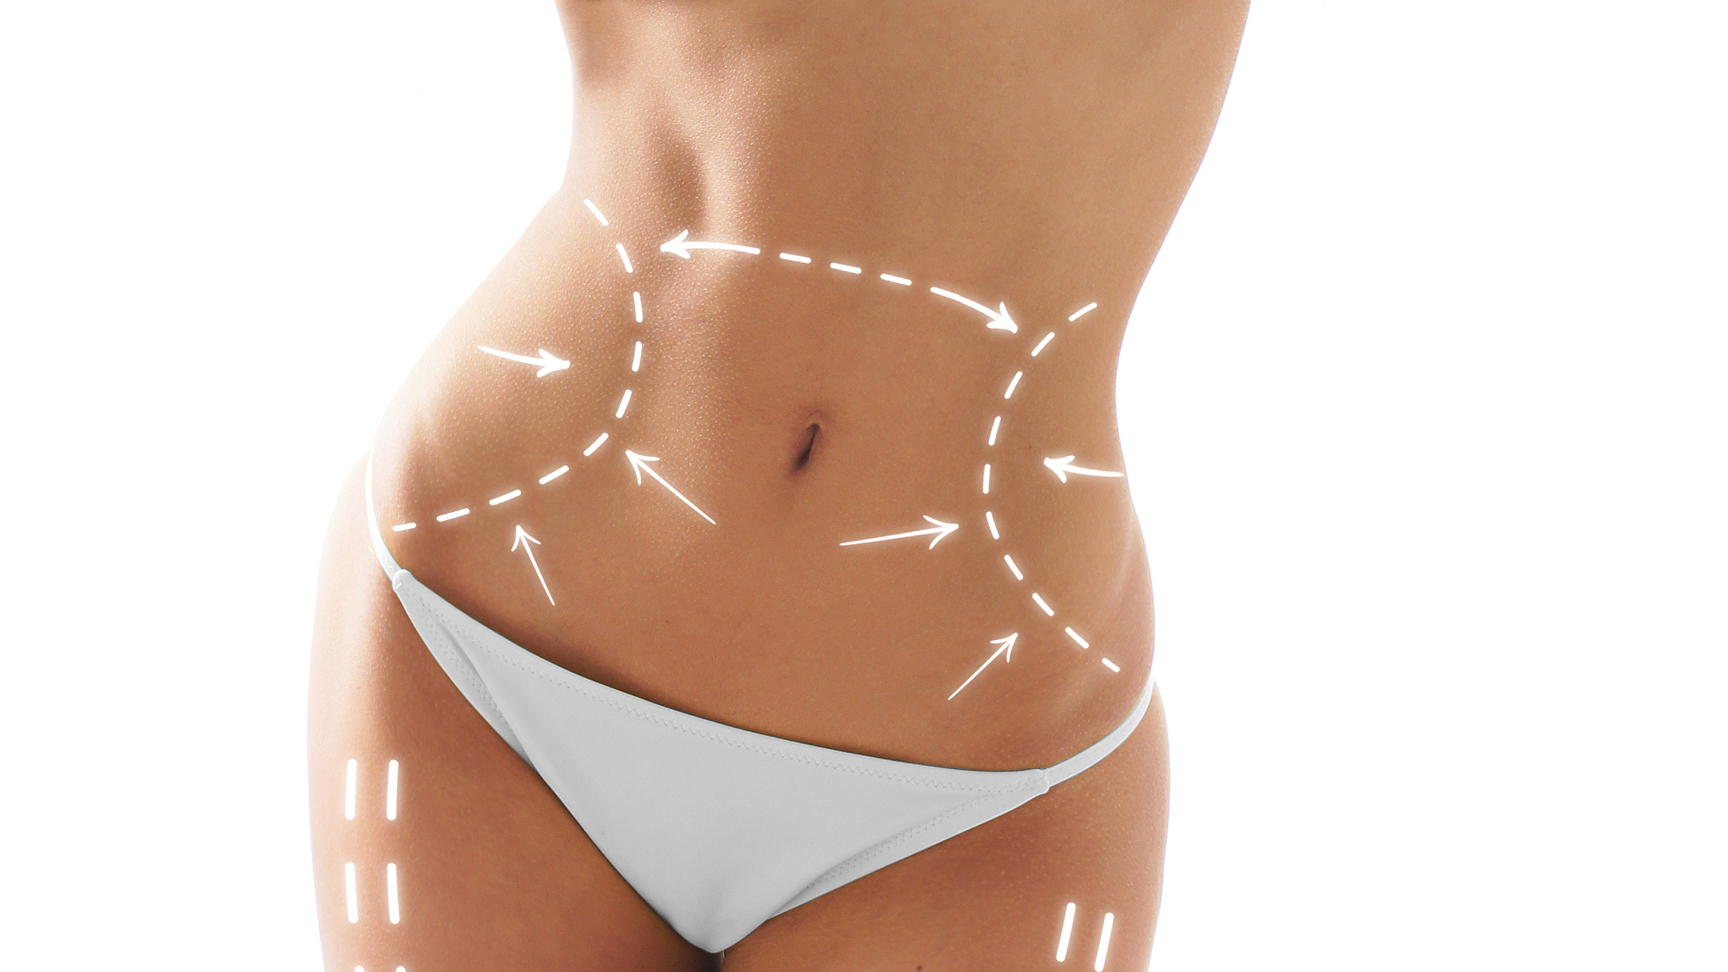 10 Risks and Benefits of Liposuction